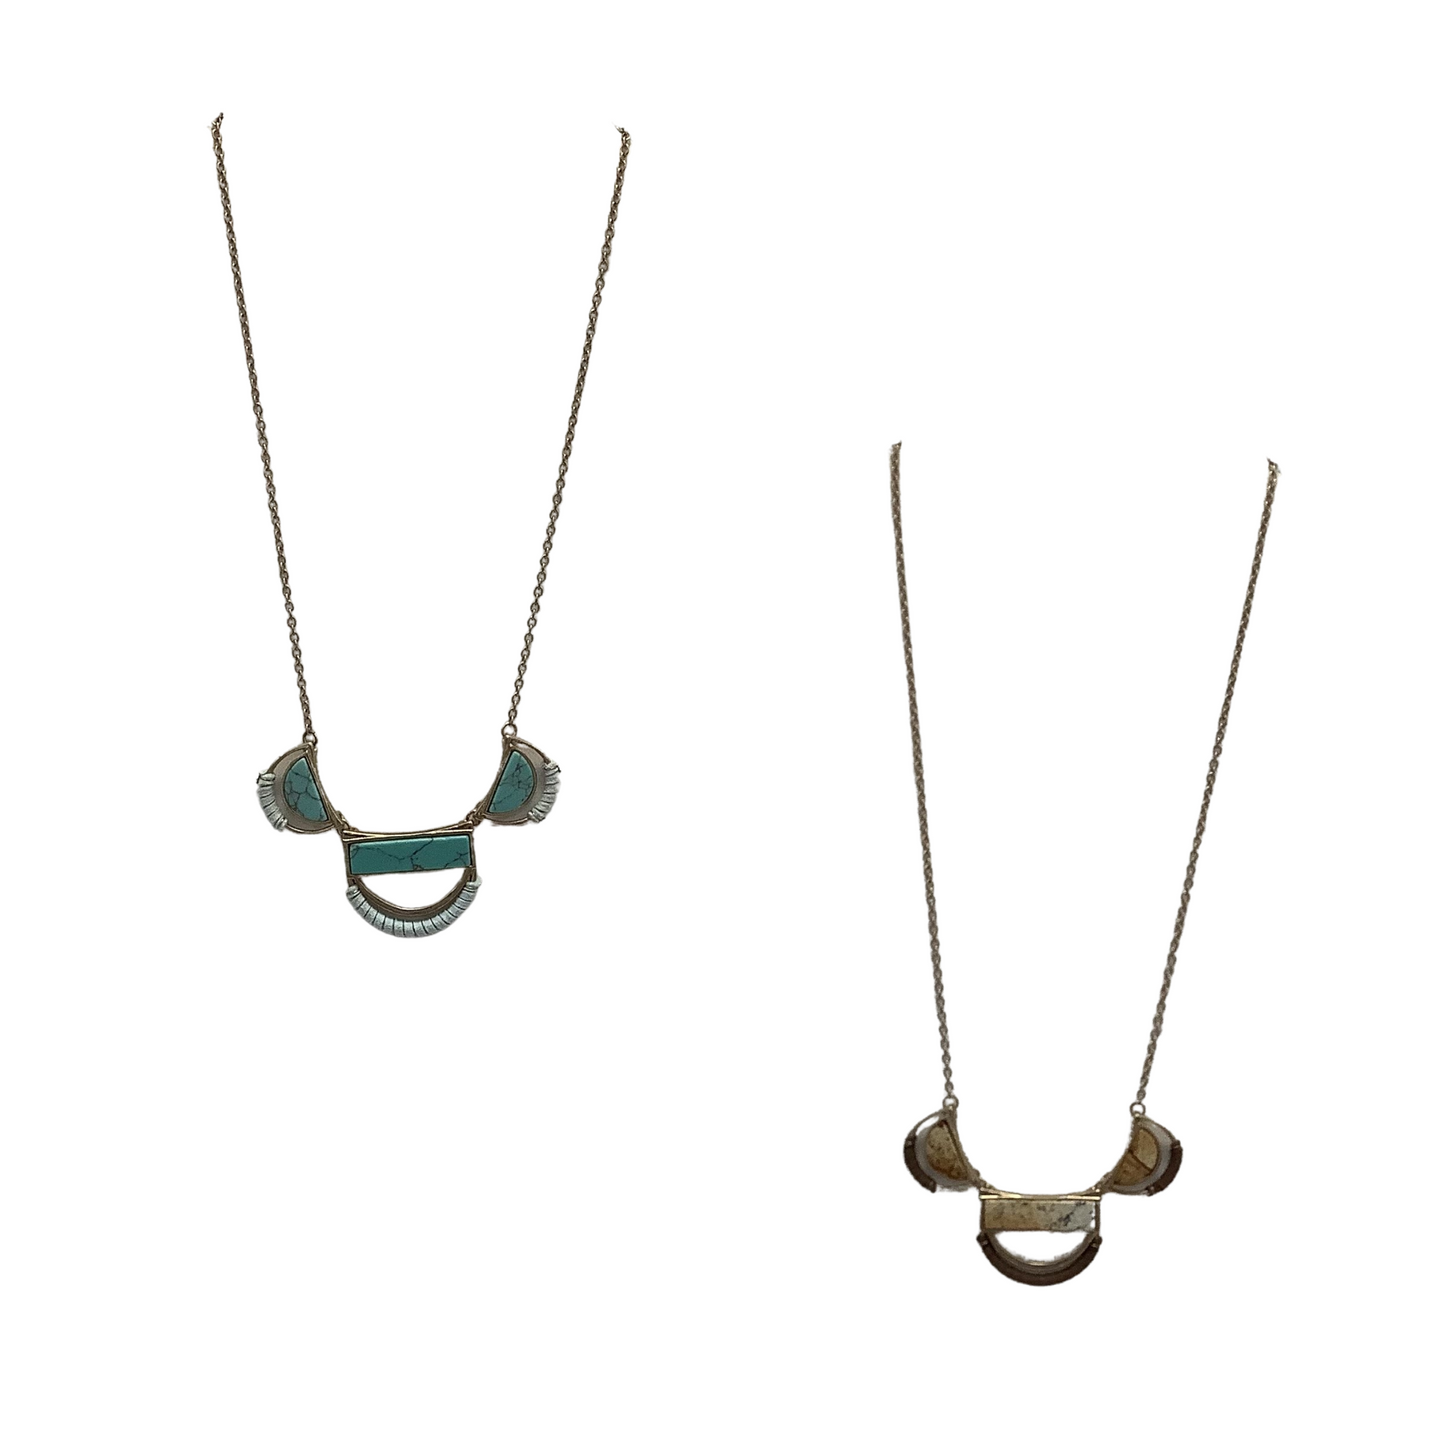 This Tri-Stone Necklace is a unique piece of jewelry featuring natural and turquoise colors. Its long length allows you to wear it as a single necklace or layer it with other necklaces for a bold look. Handcrafted with quality materials, this necklace is a timeless accessory for any outfit.